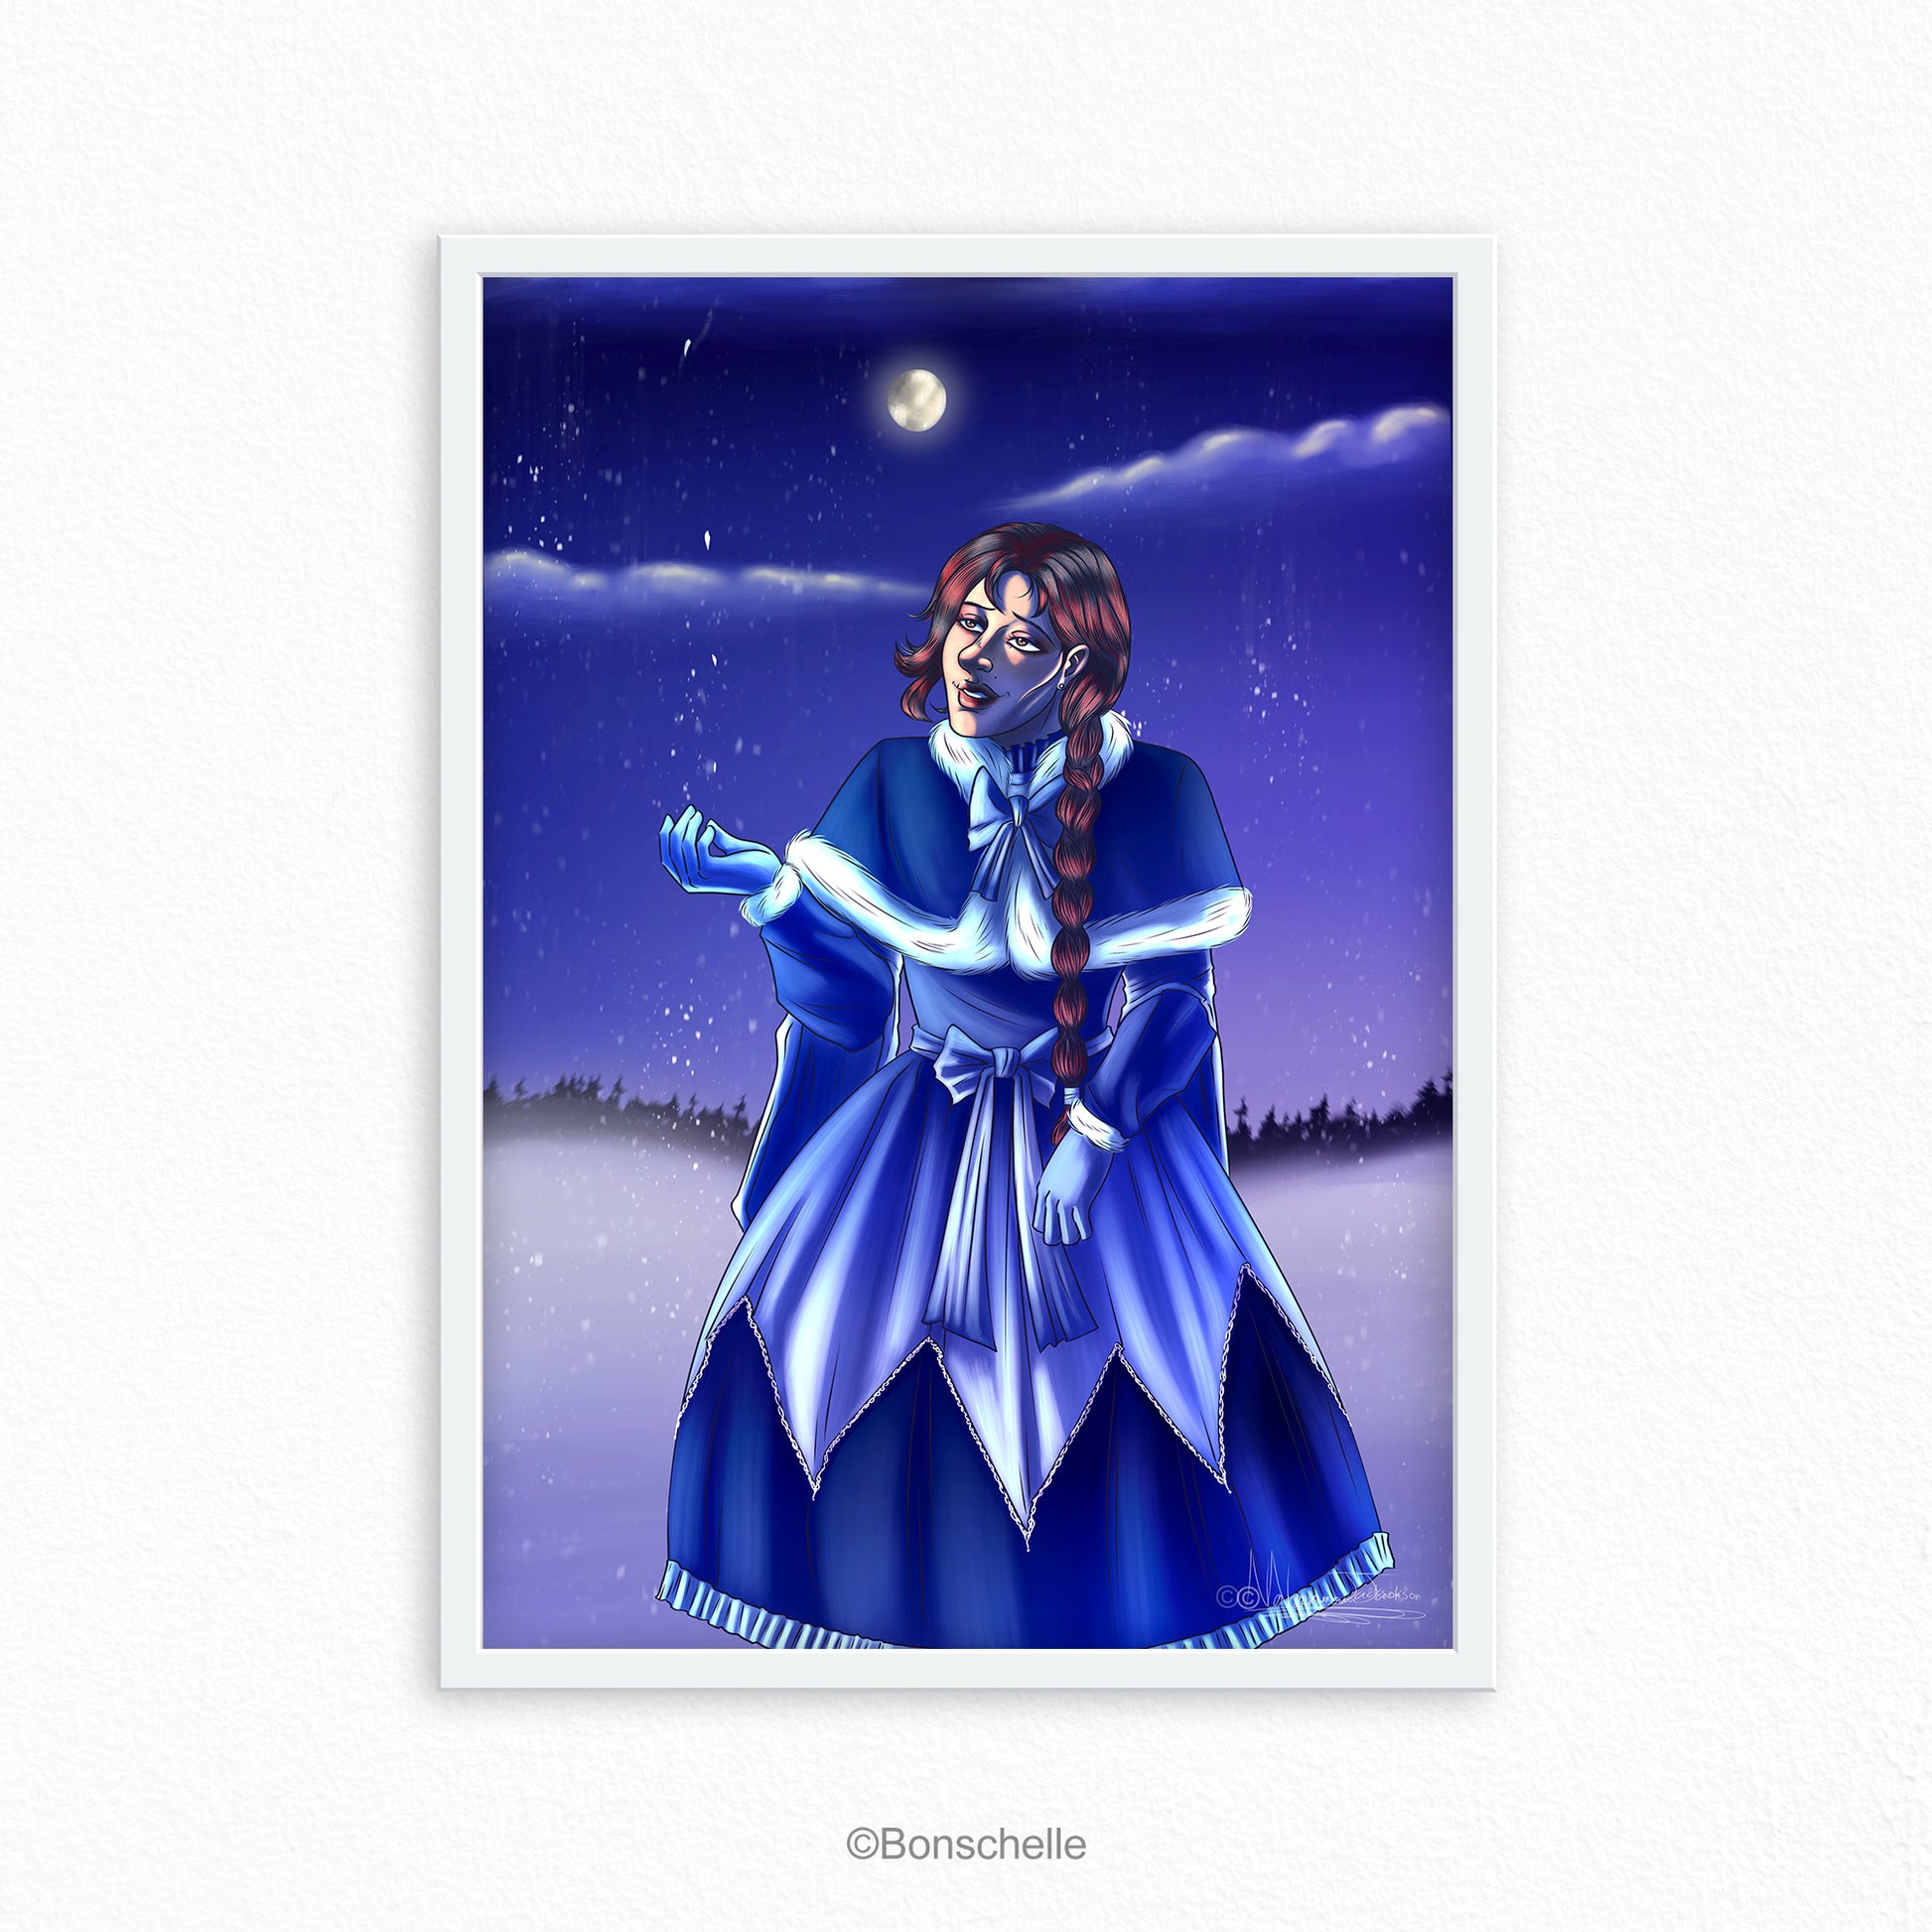 An original art print of a young girl in Lolita fashion holding her hand out to the snowflakes as they fall. The full moon glows in the background. The print has a white frame.